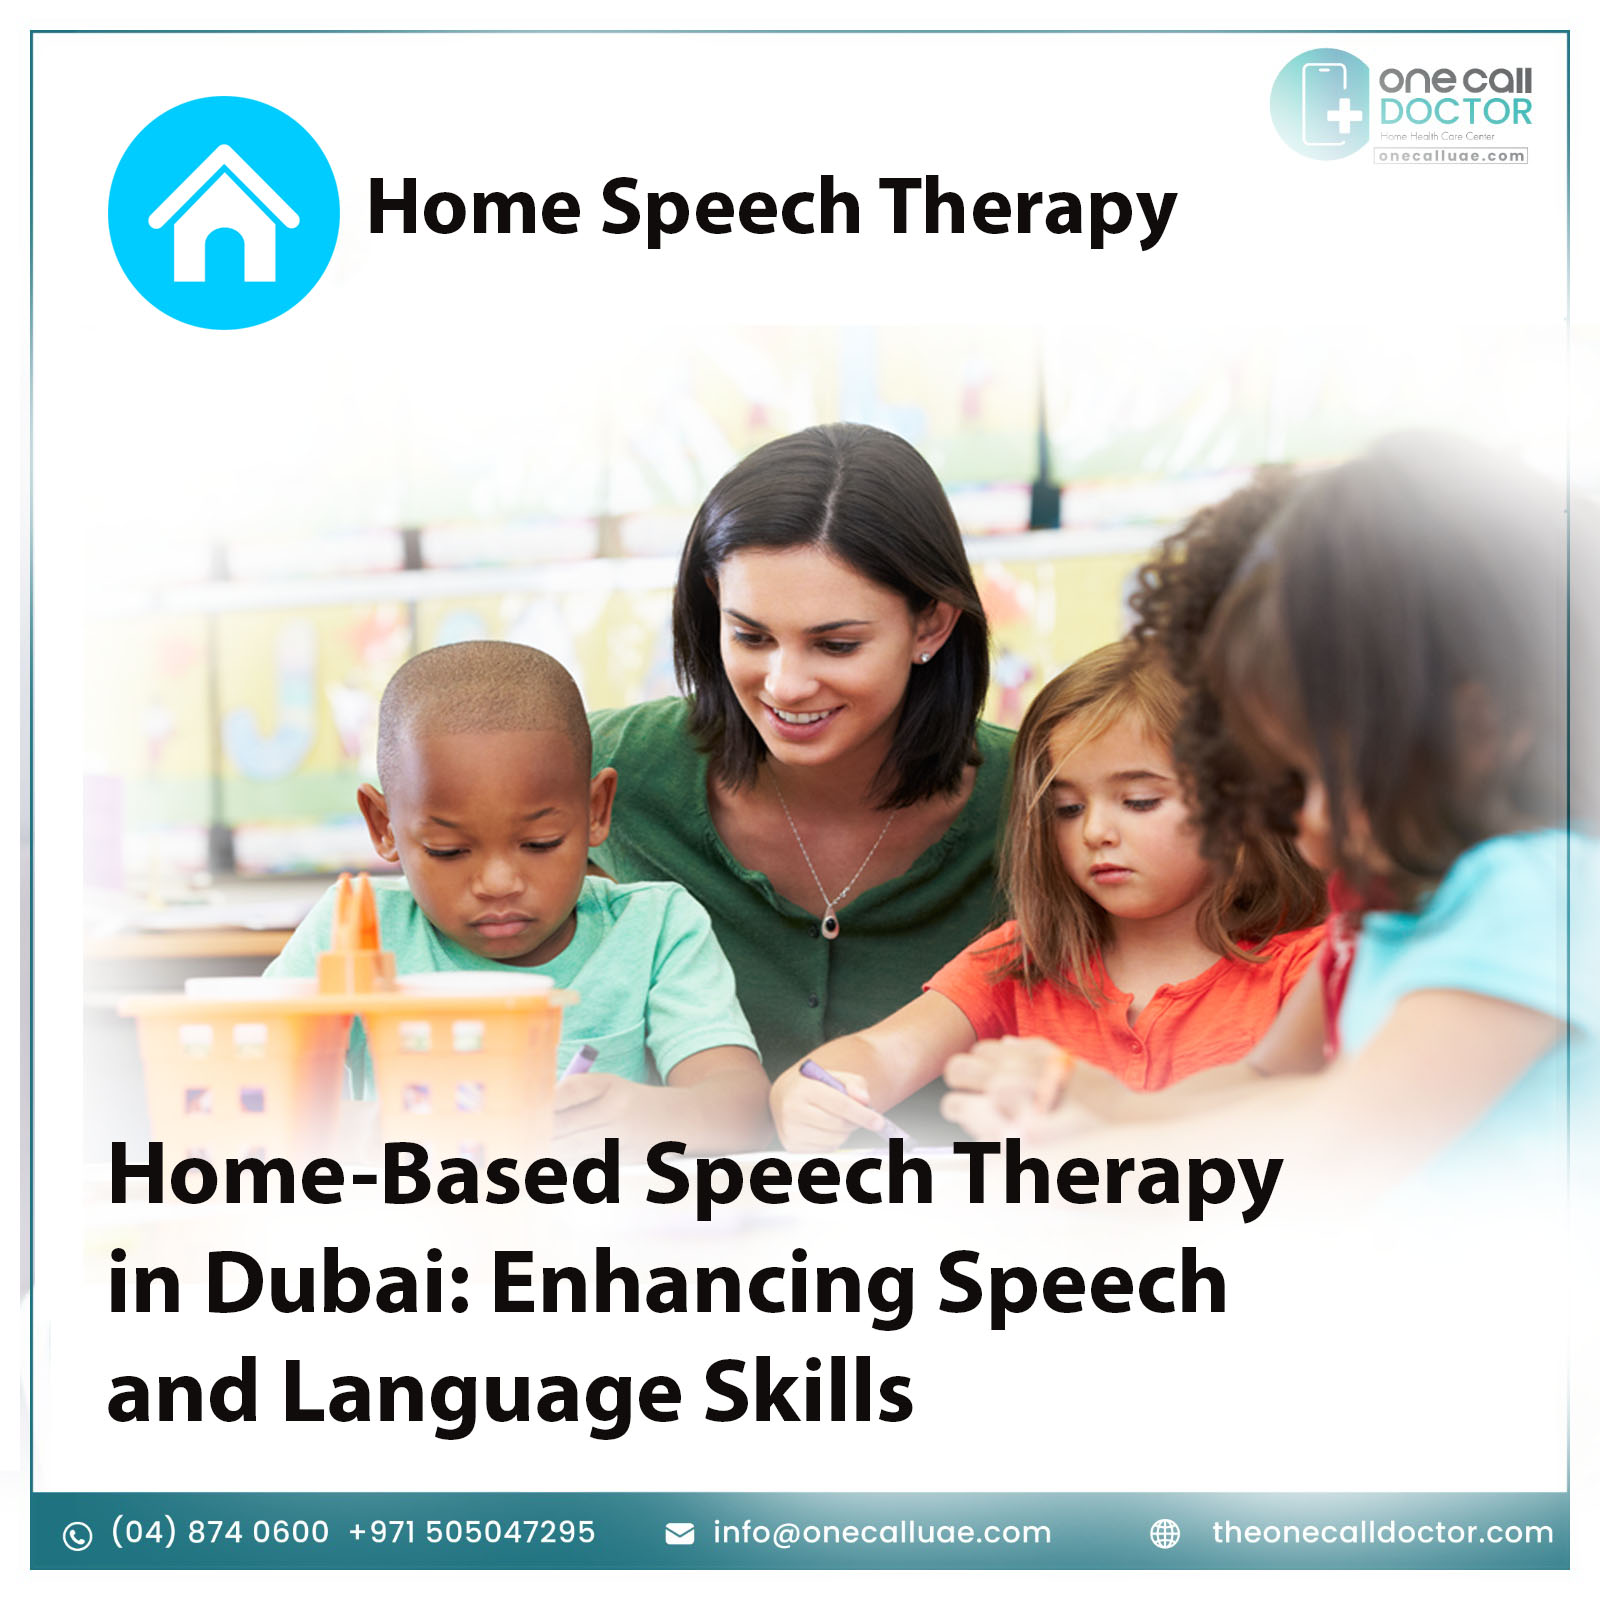 Speech therapy services at home in Dubai